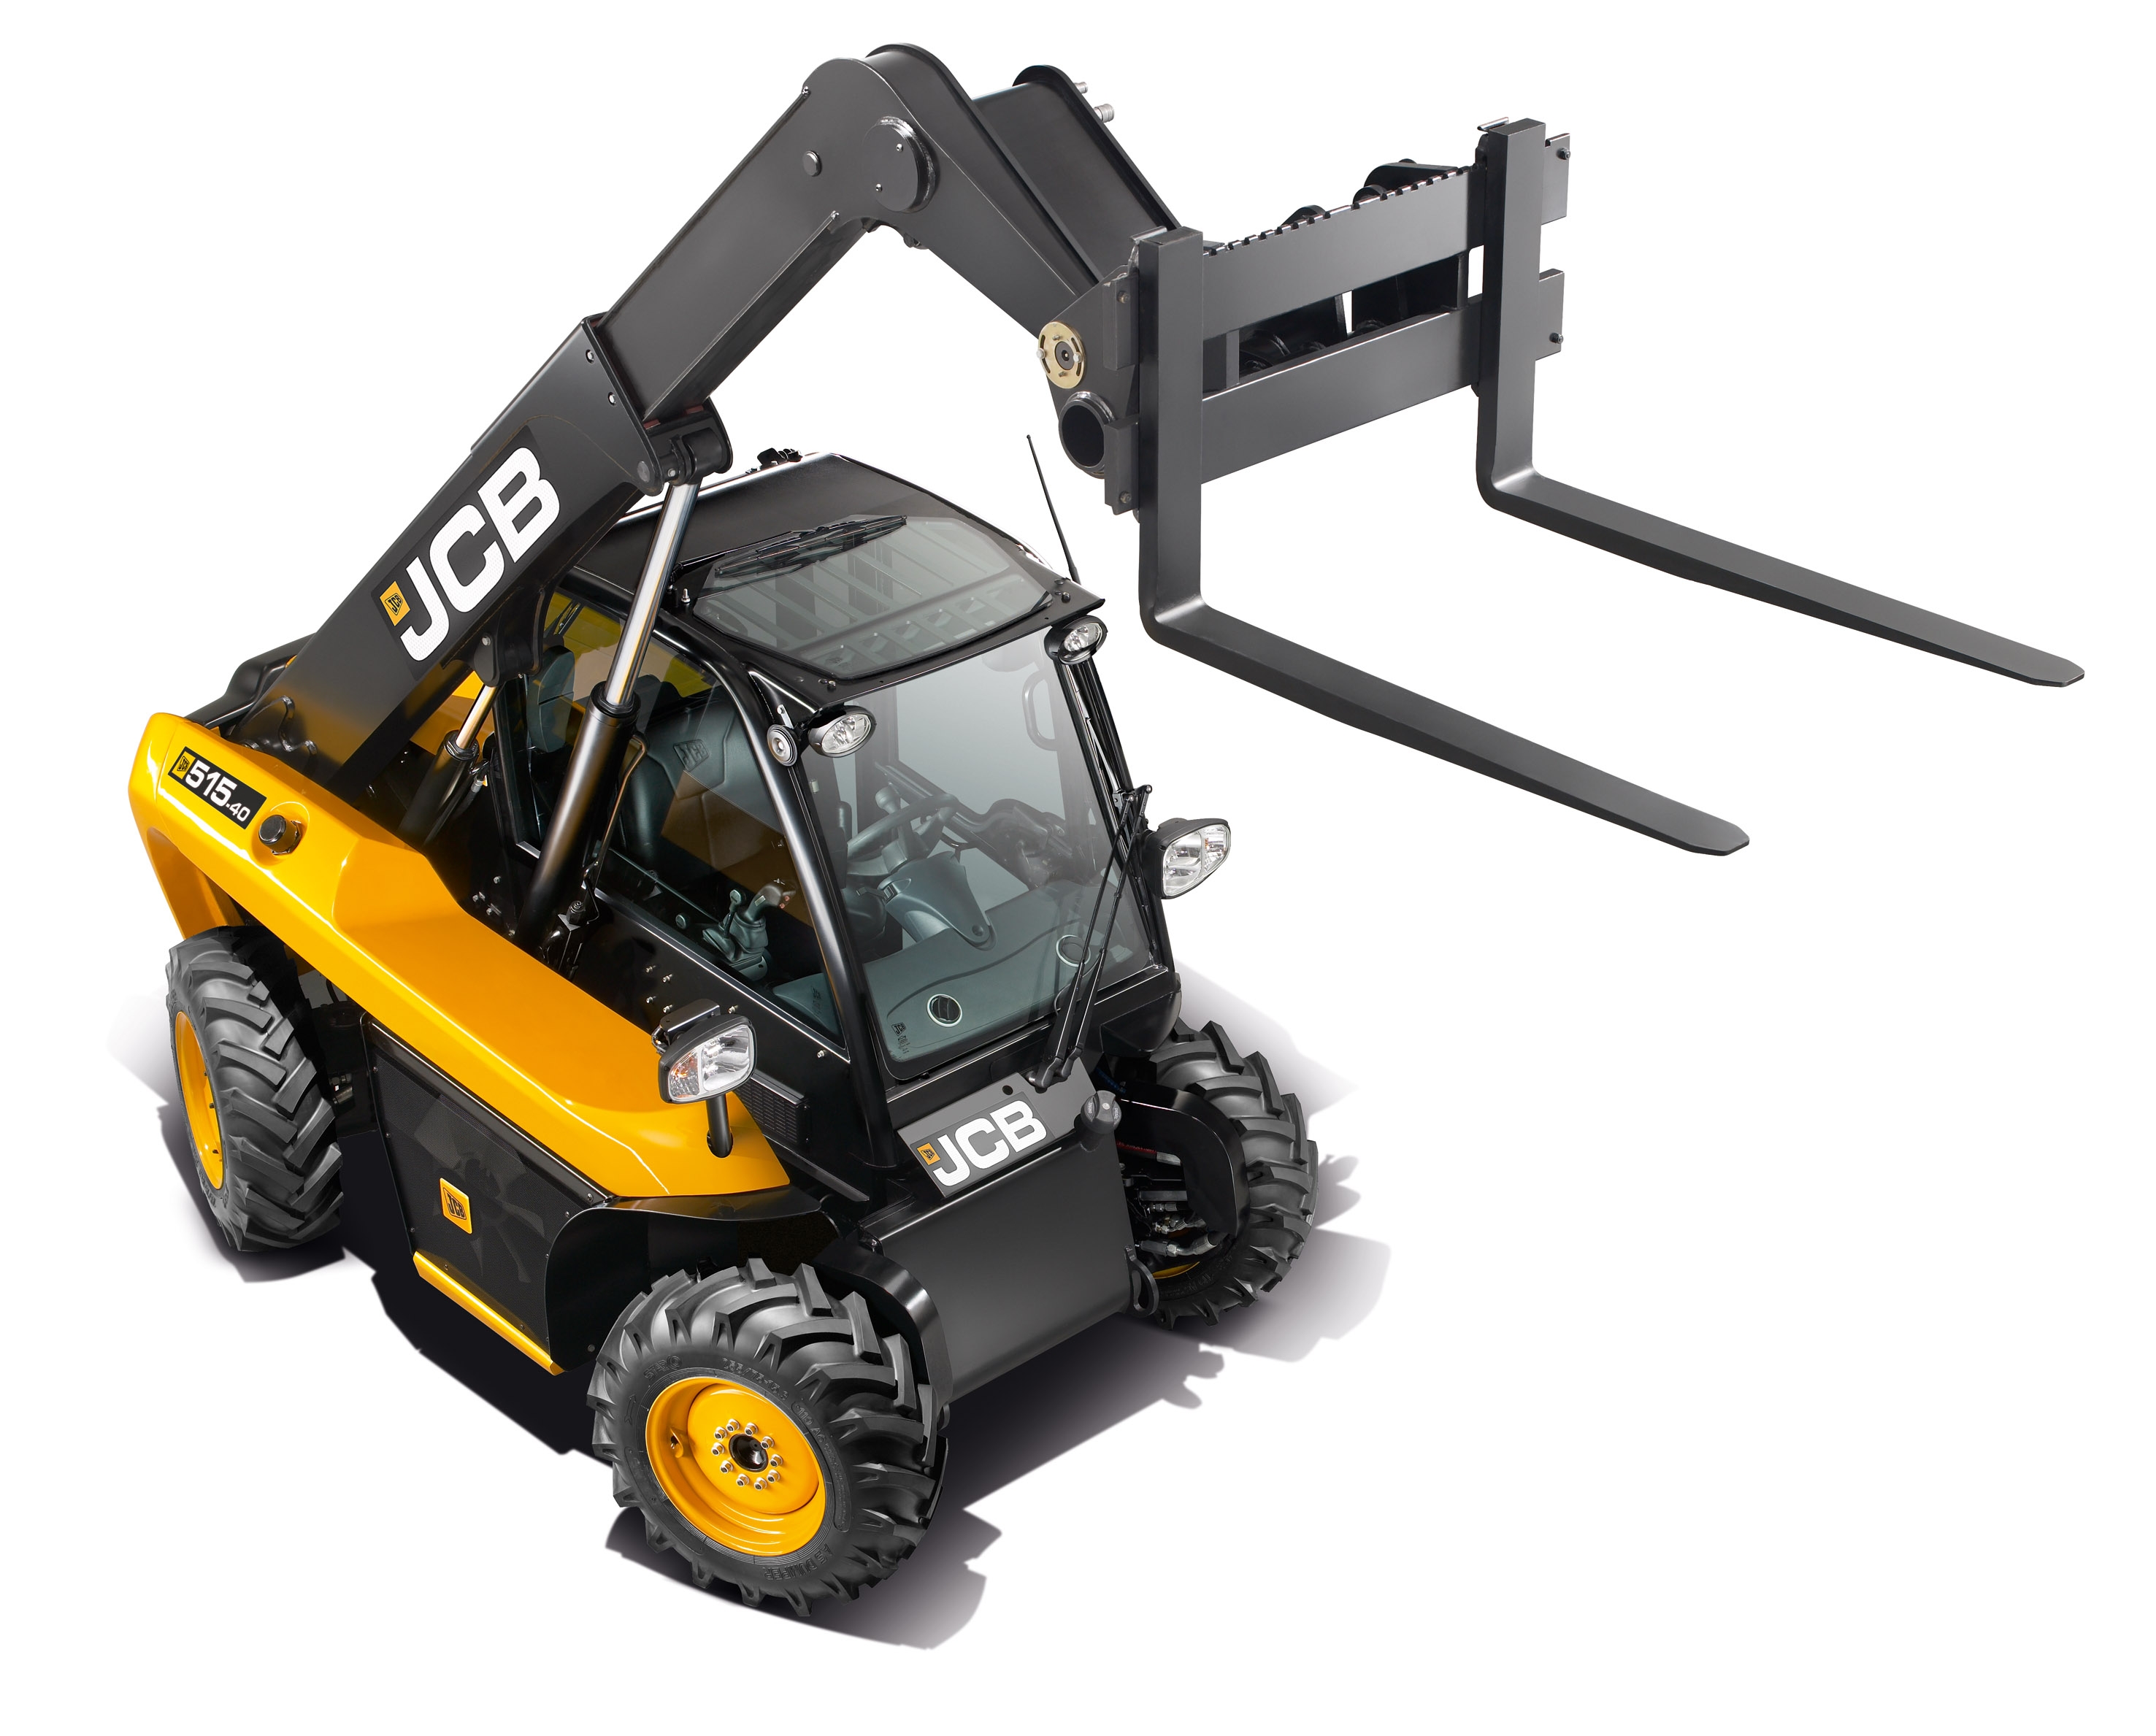 JCB Launches New 515-40 Compact Telescopic Handler | Compact Equipment